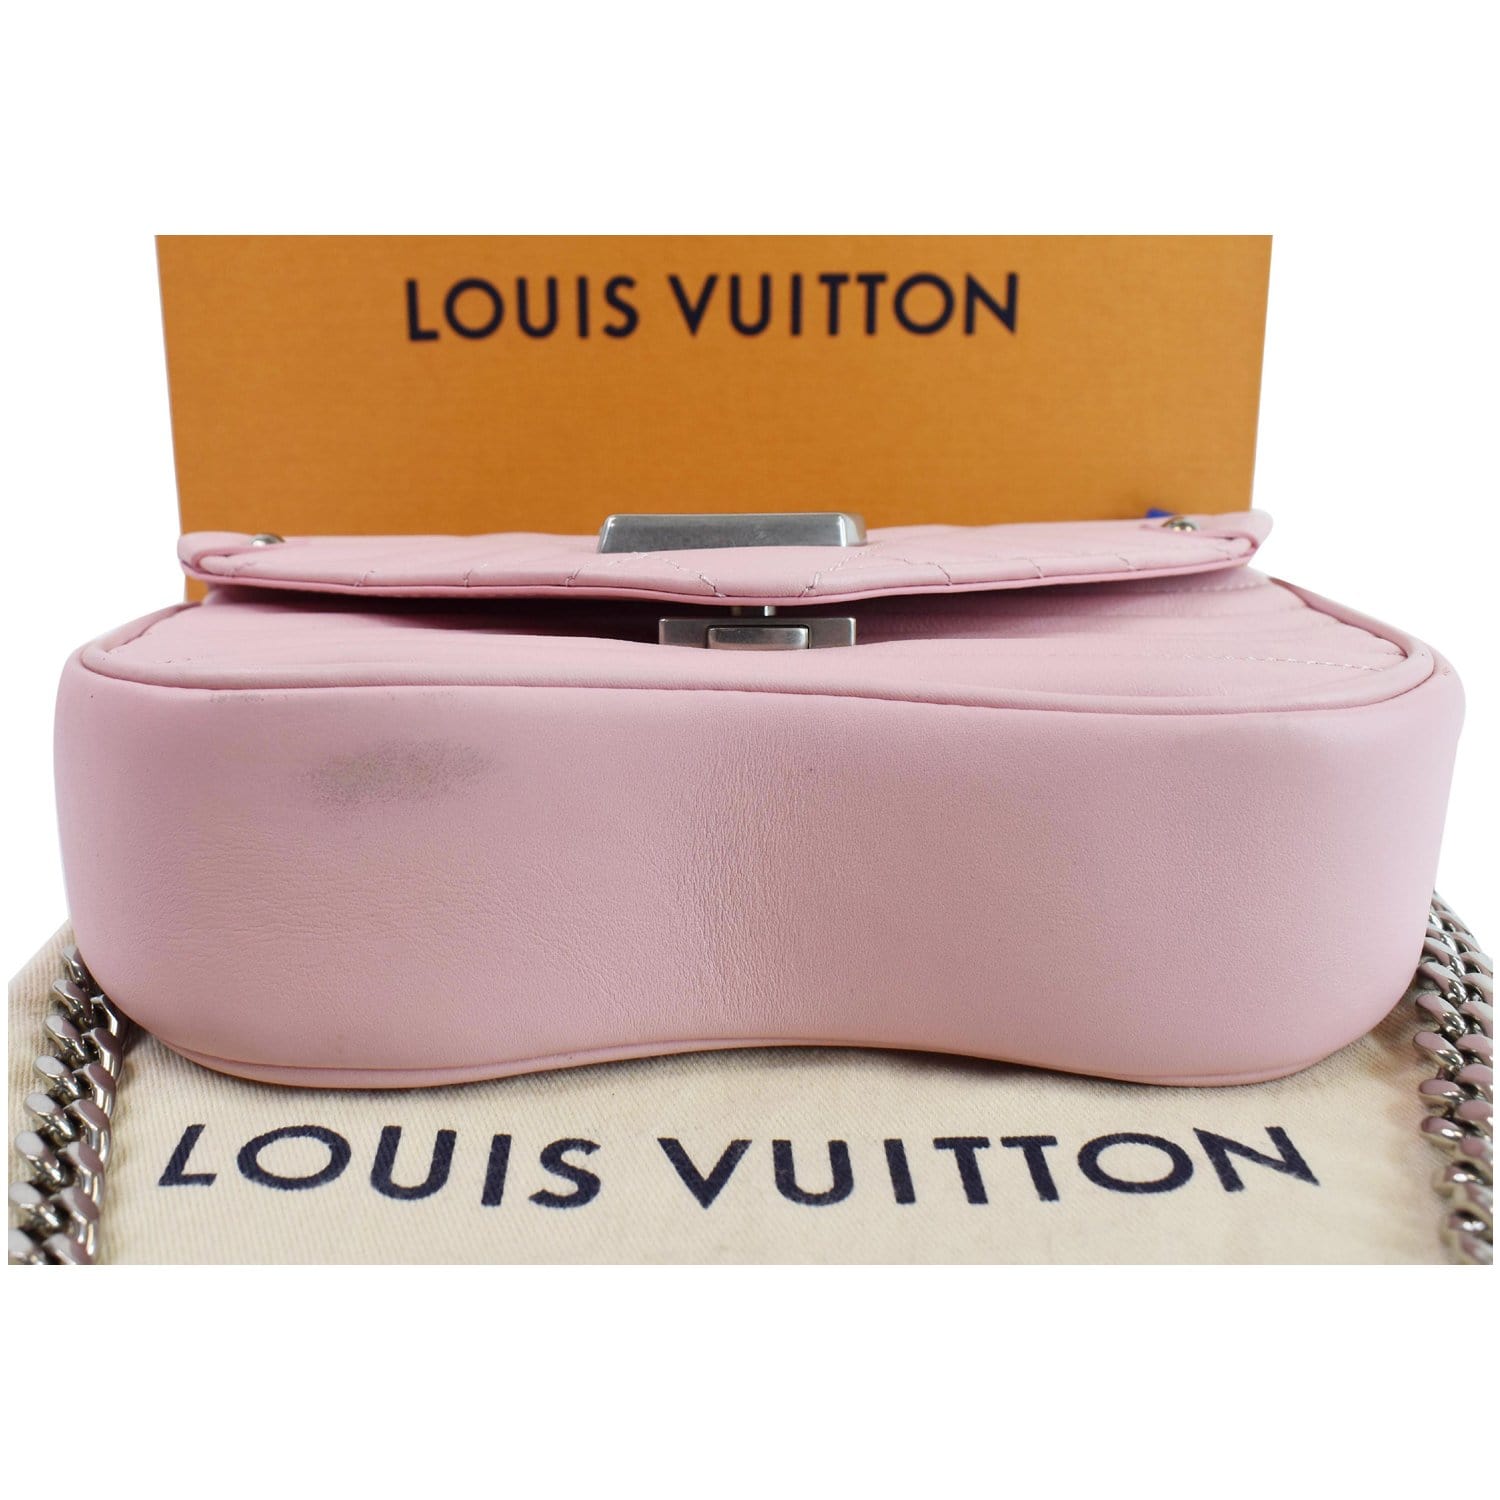 Louis Vuitton - Authenticated New Wave Handbag - Leather Pink Plain for Women, Very Good Condition